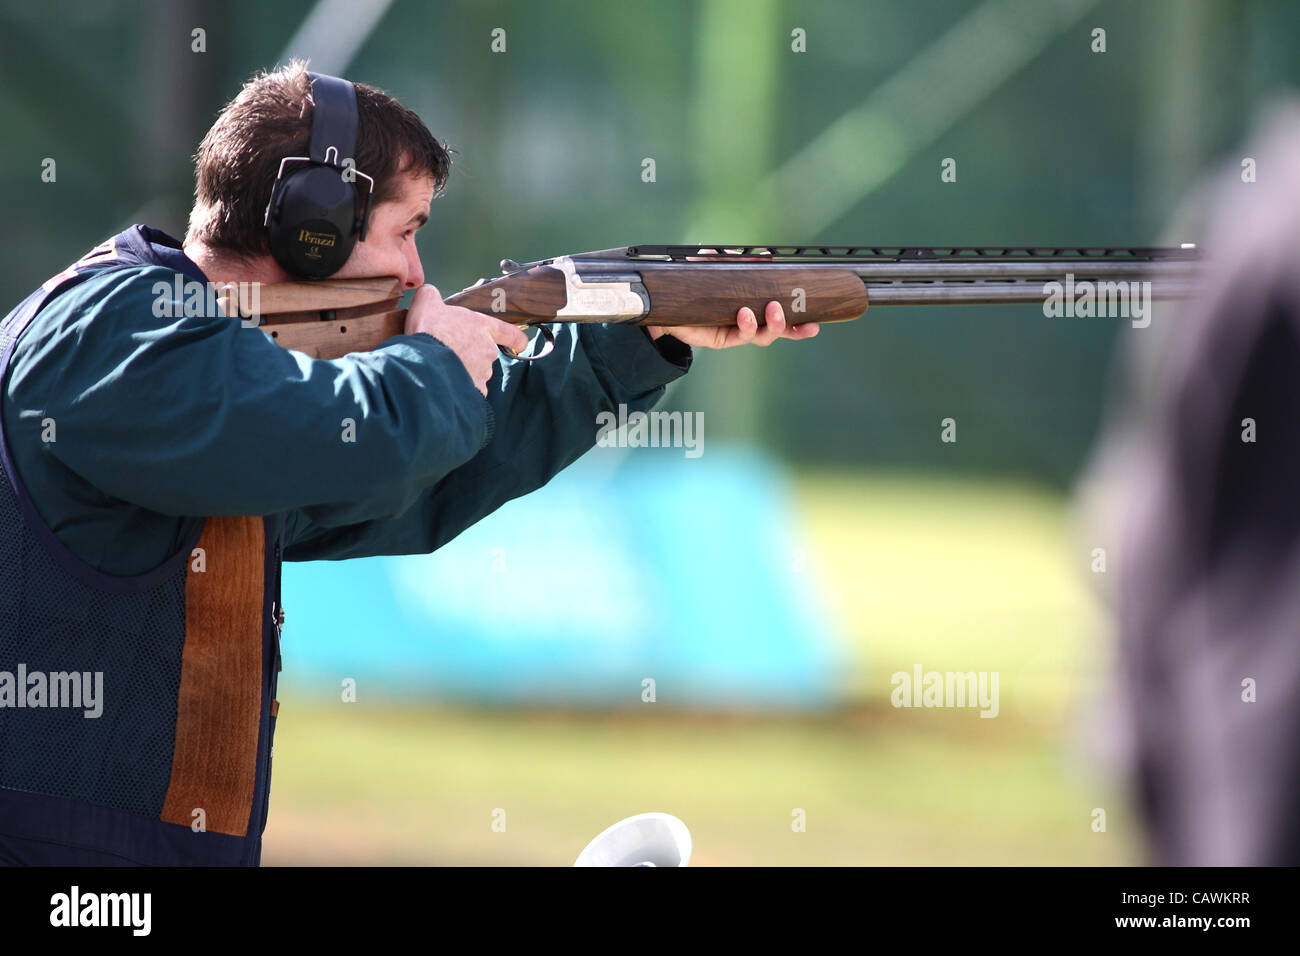 27.04.2012 London, England. Edward Ling (GBR) in action during the mens Trap Final Stock Photo